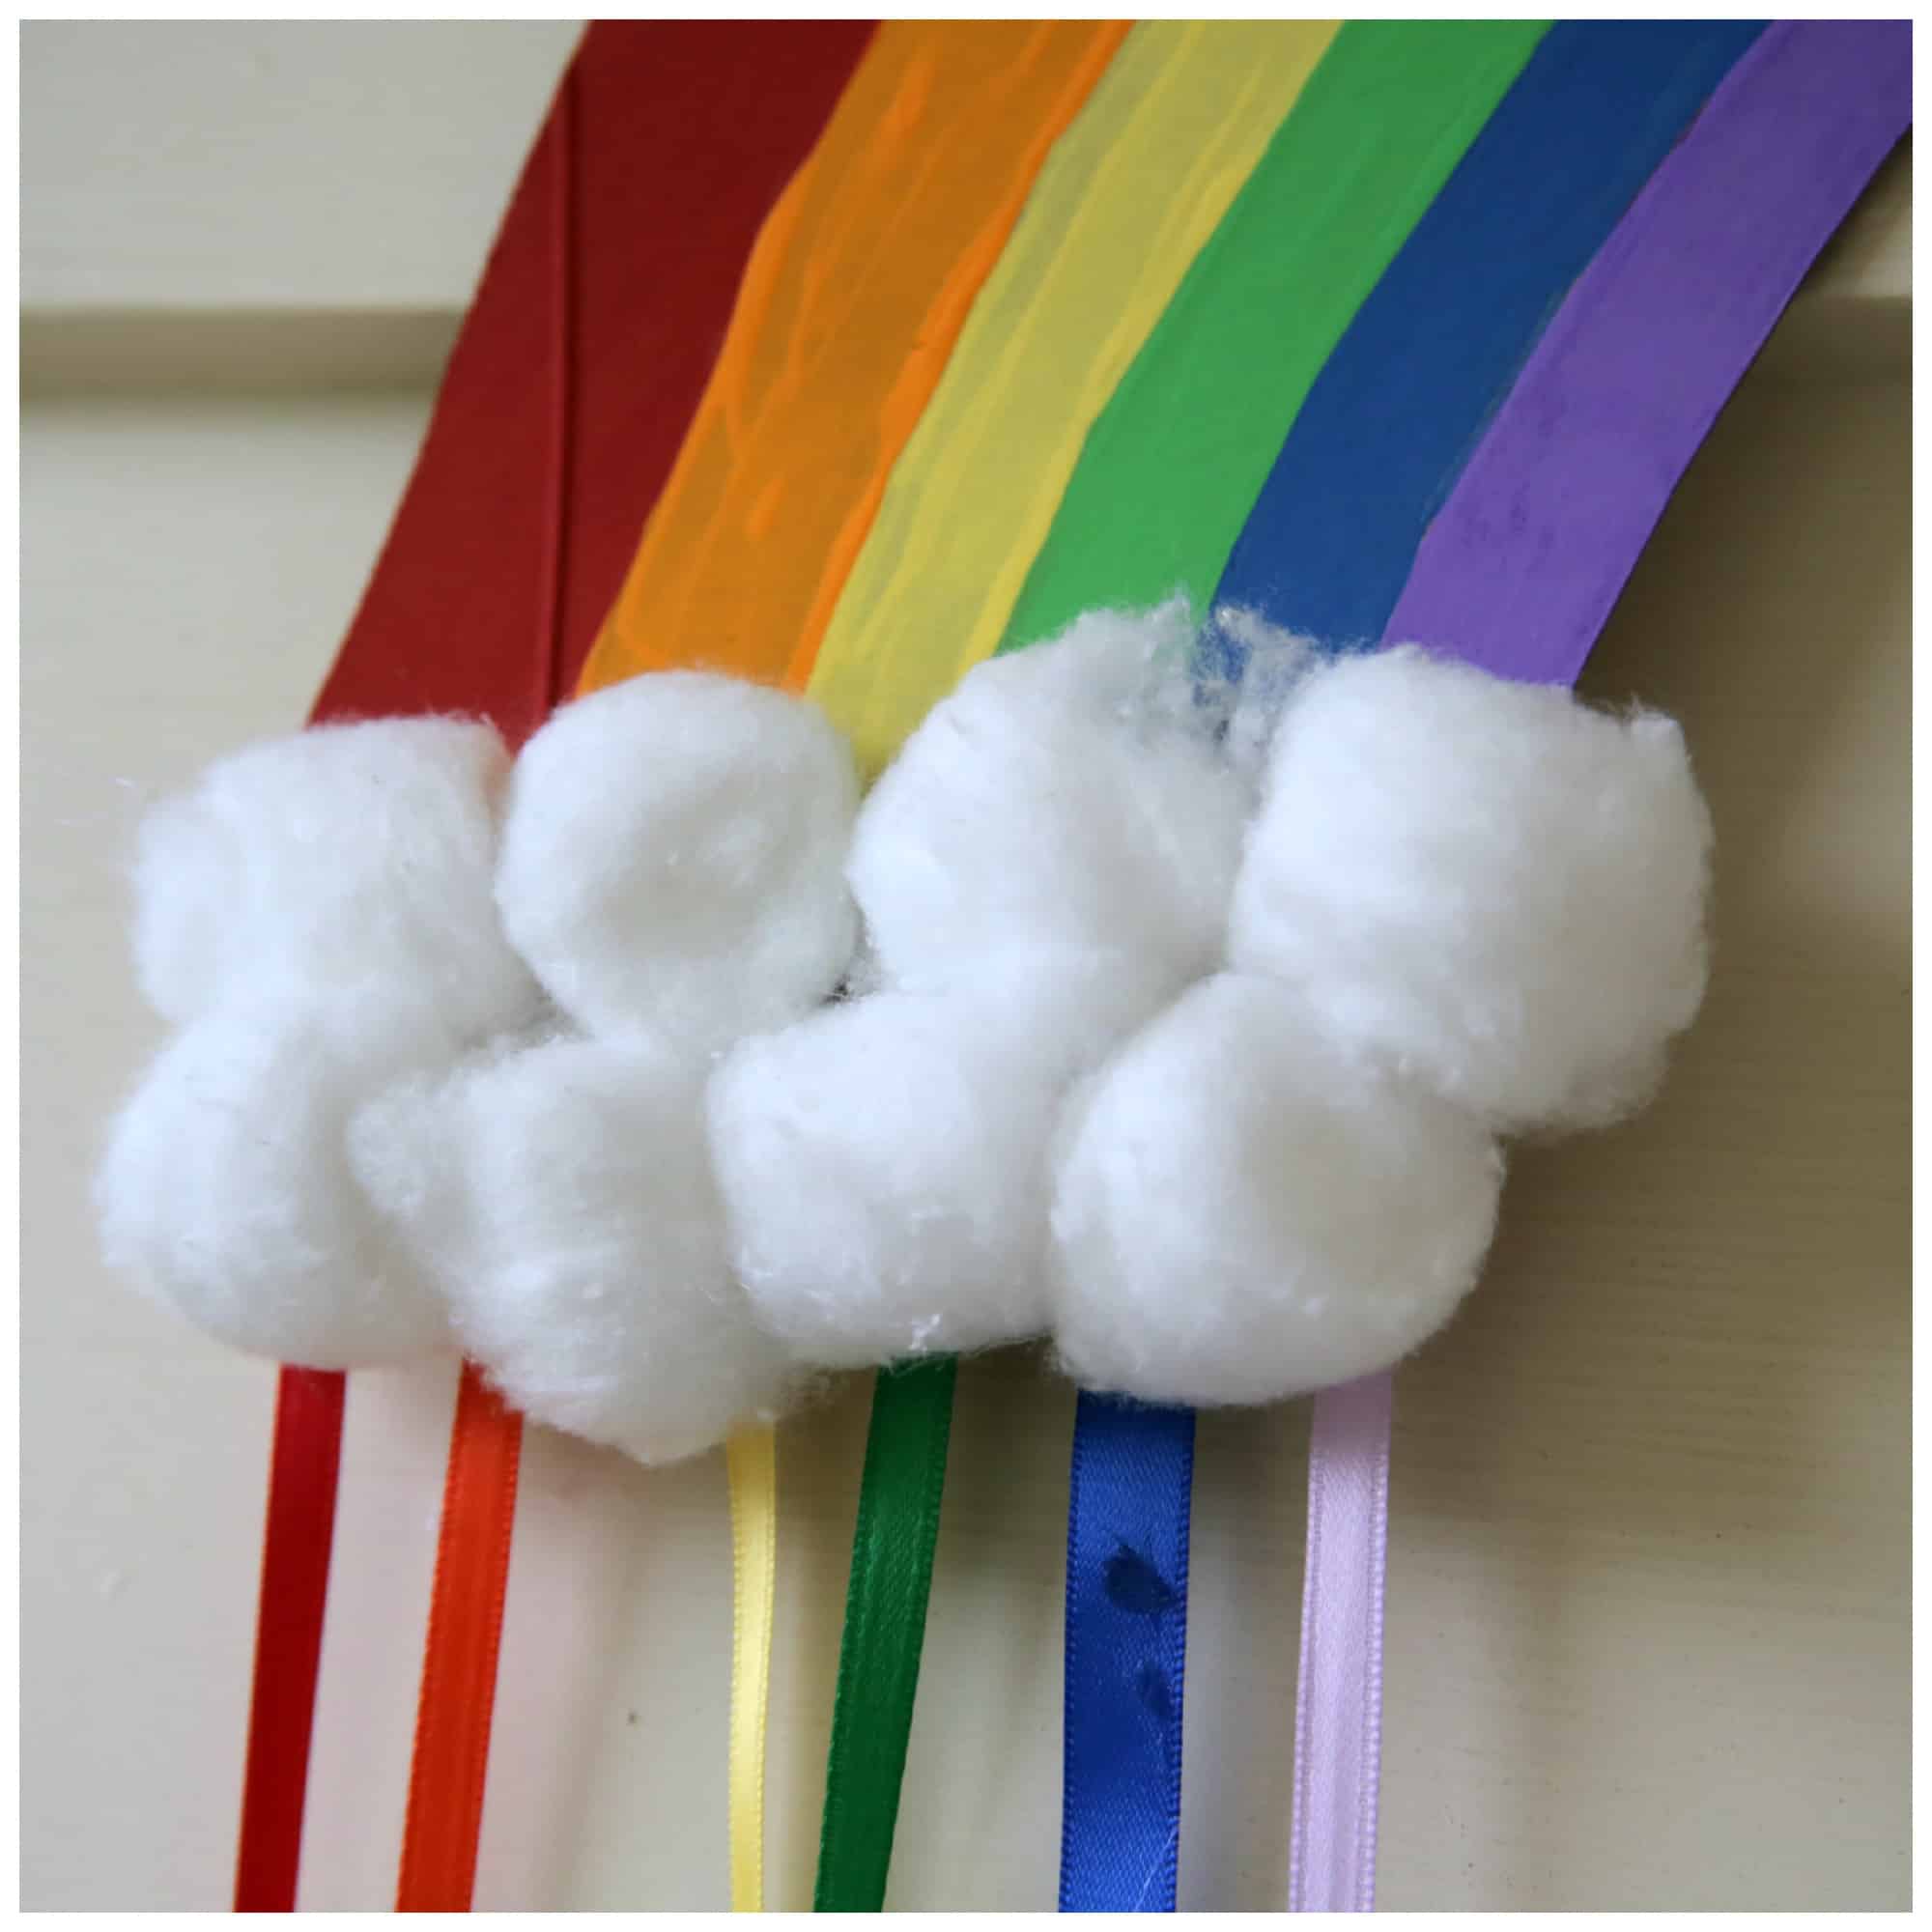 Cotton ball rainbow clouds with ribbons